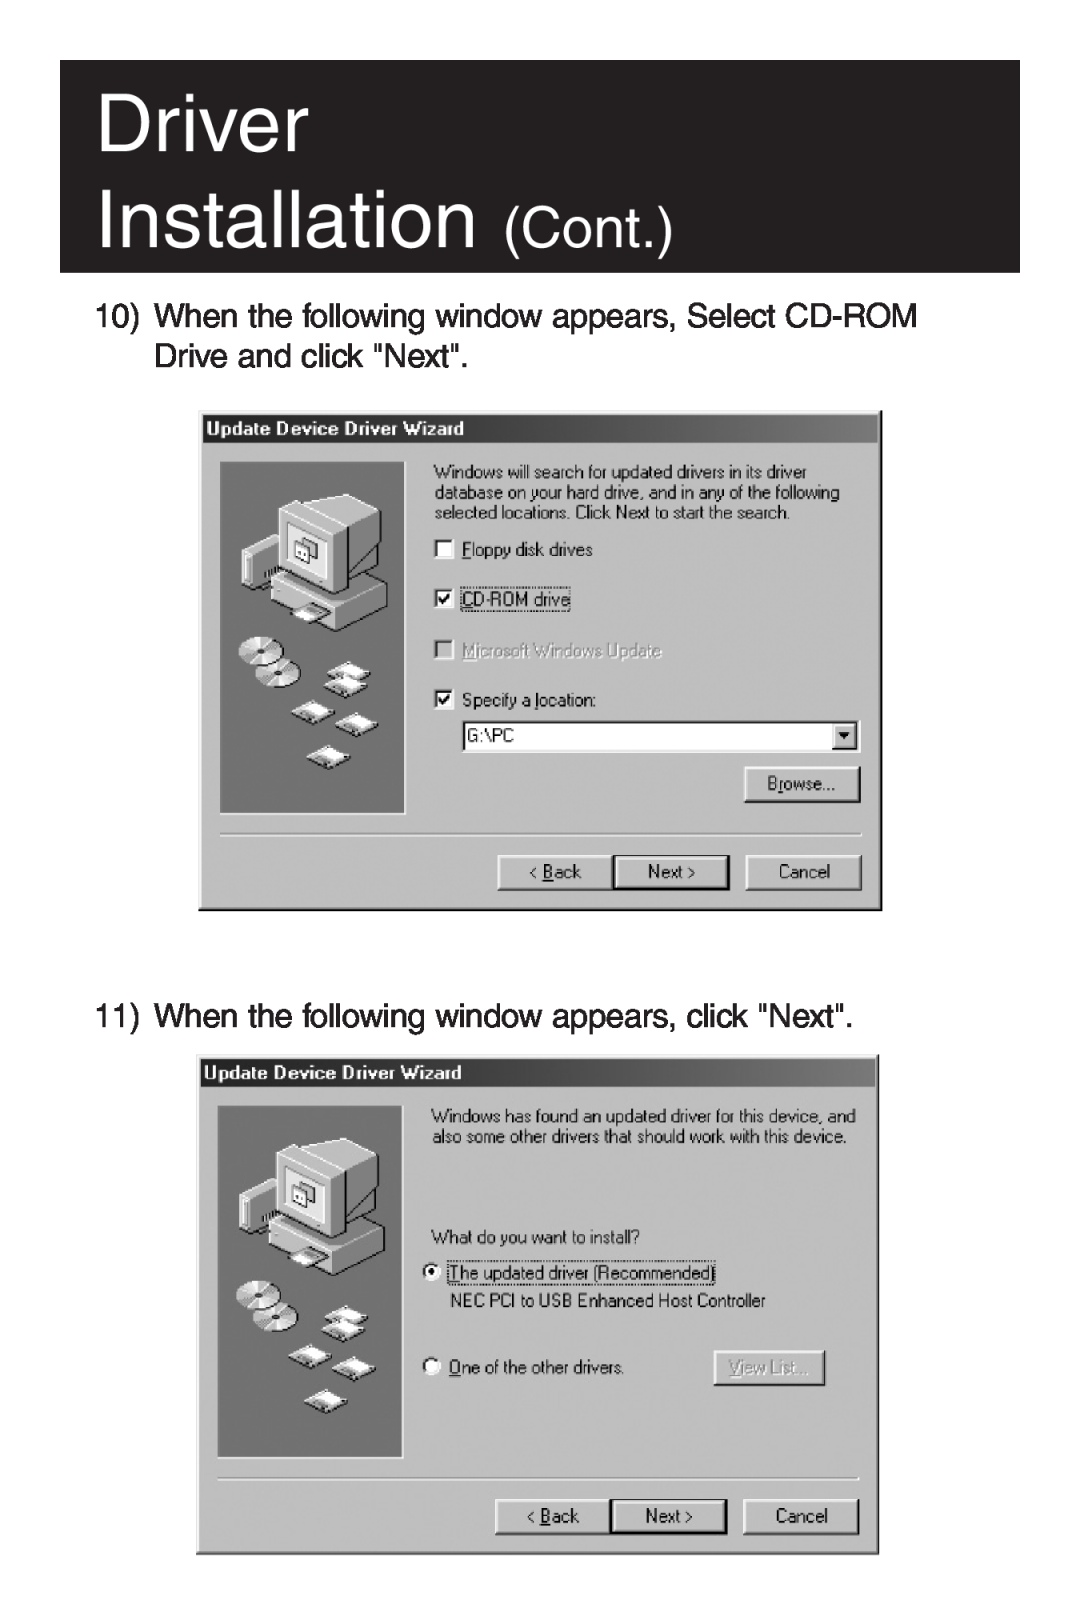 Tripp Lite U234-005-R user manual Driver Installation Cont, When the following window appears, click Next 